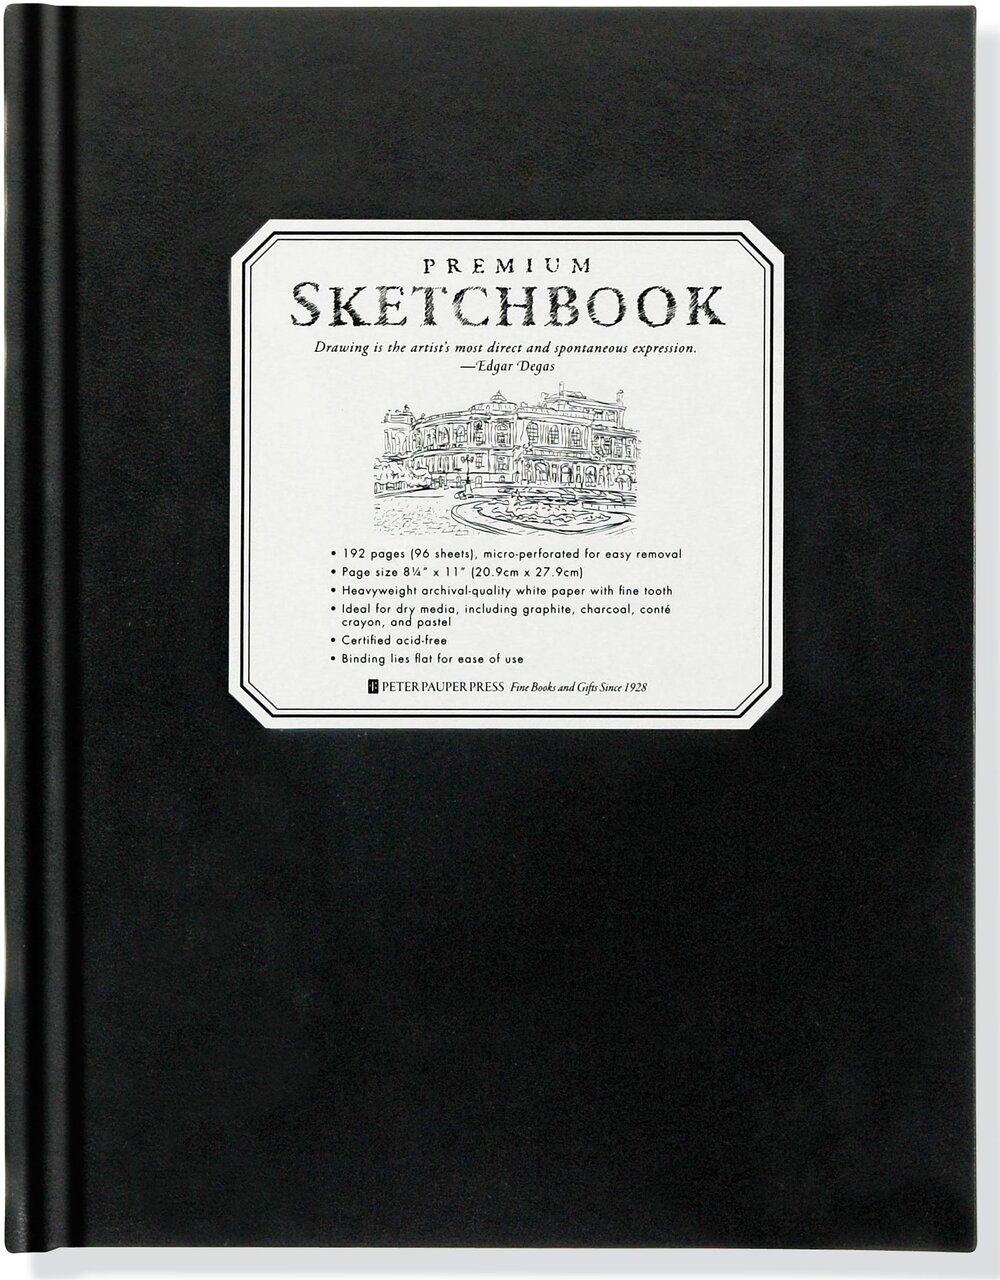 SKETCHBOOK  100 pages of 8.5 X 11 Large (A4) Plain Paper for Drawing,  Colouring, Writing, doodling and and more: sketch book for kids, adults,  artist drop your art here: Botti, Lucas